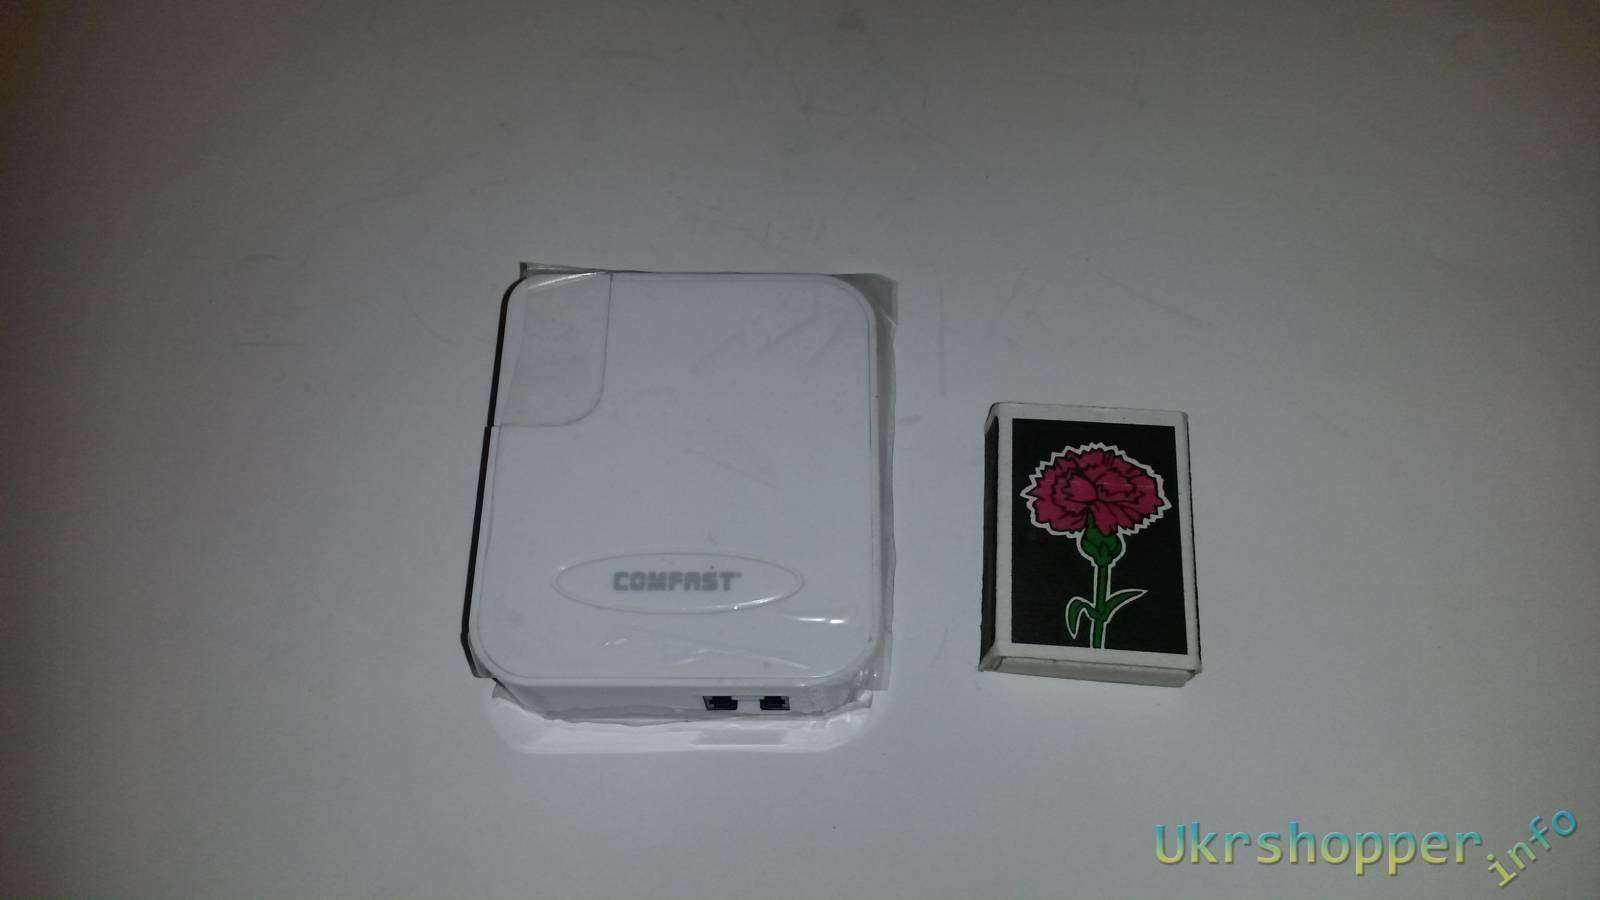 DealExtreme: Comfast WR6000N Mini Portable Wireless Router